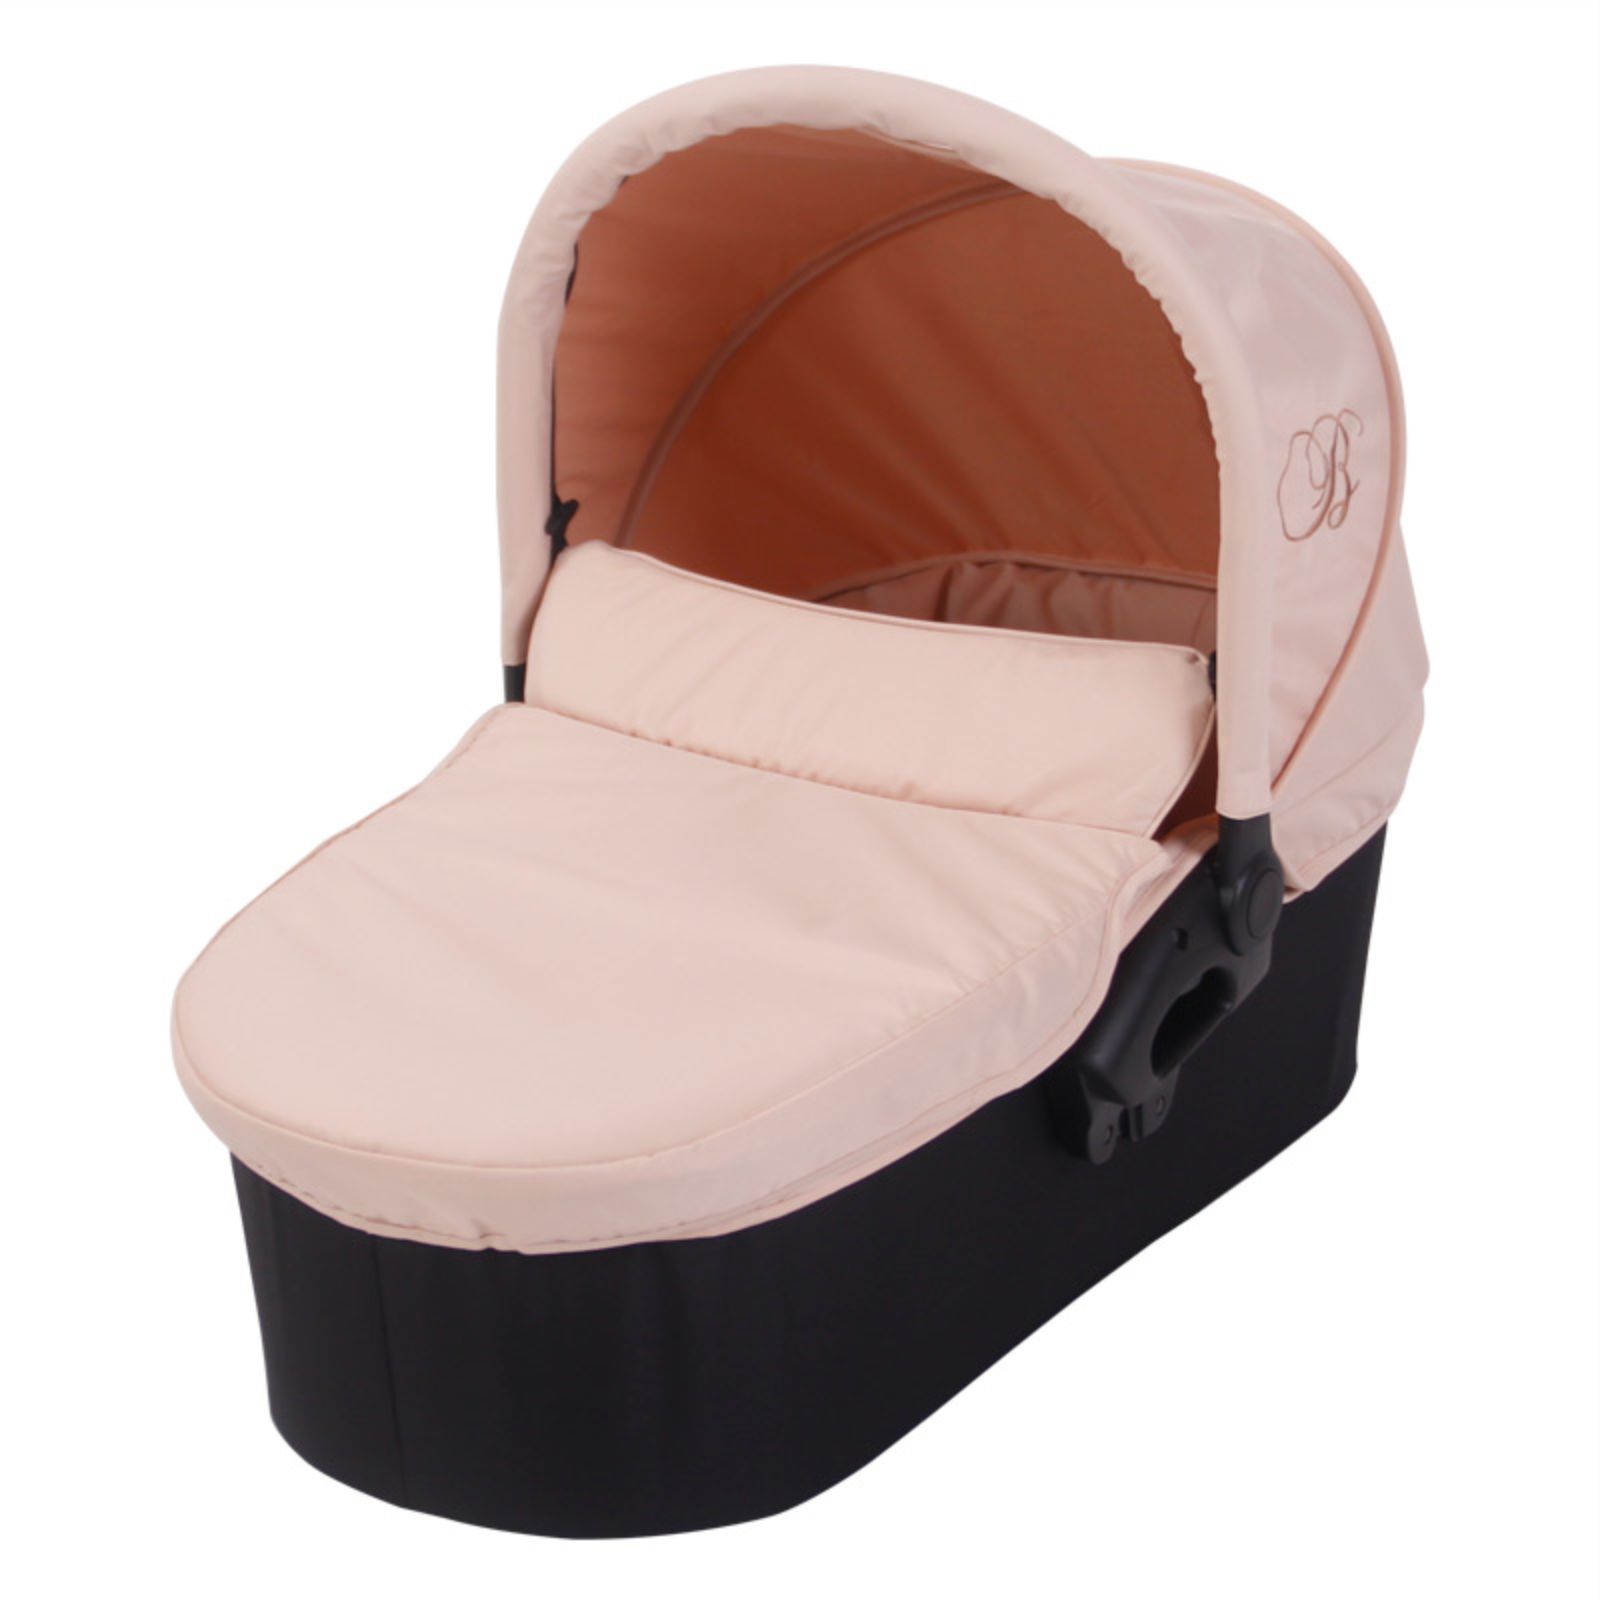 abbey catwalk collection mb200  travel system